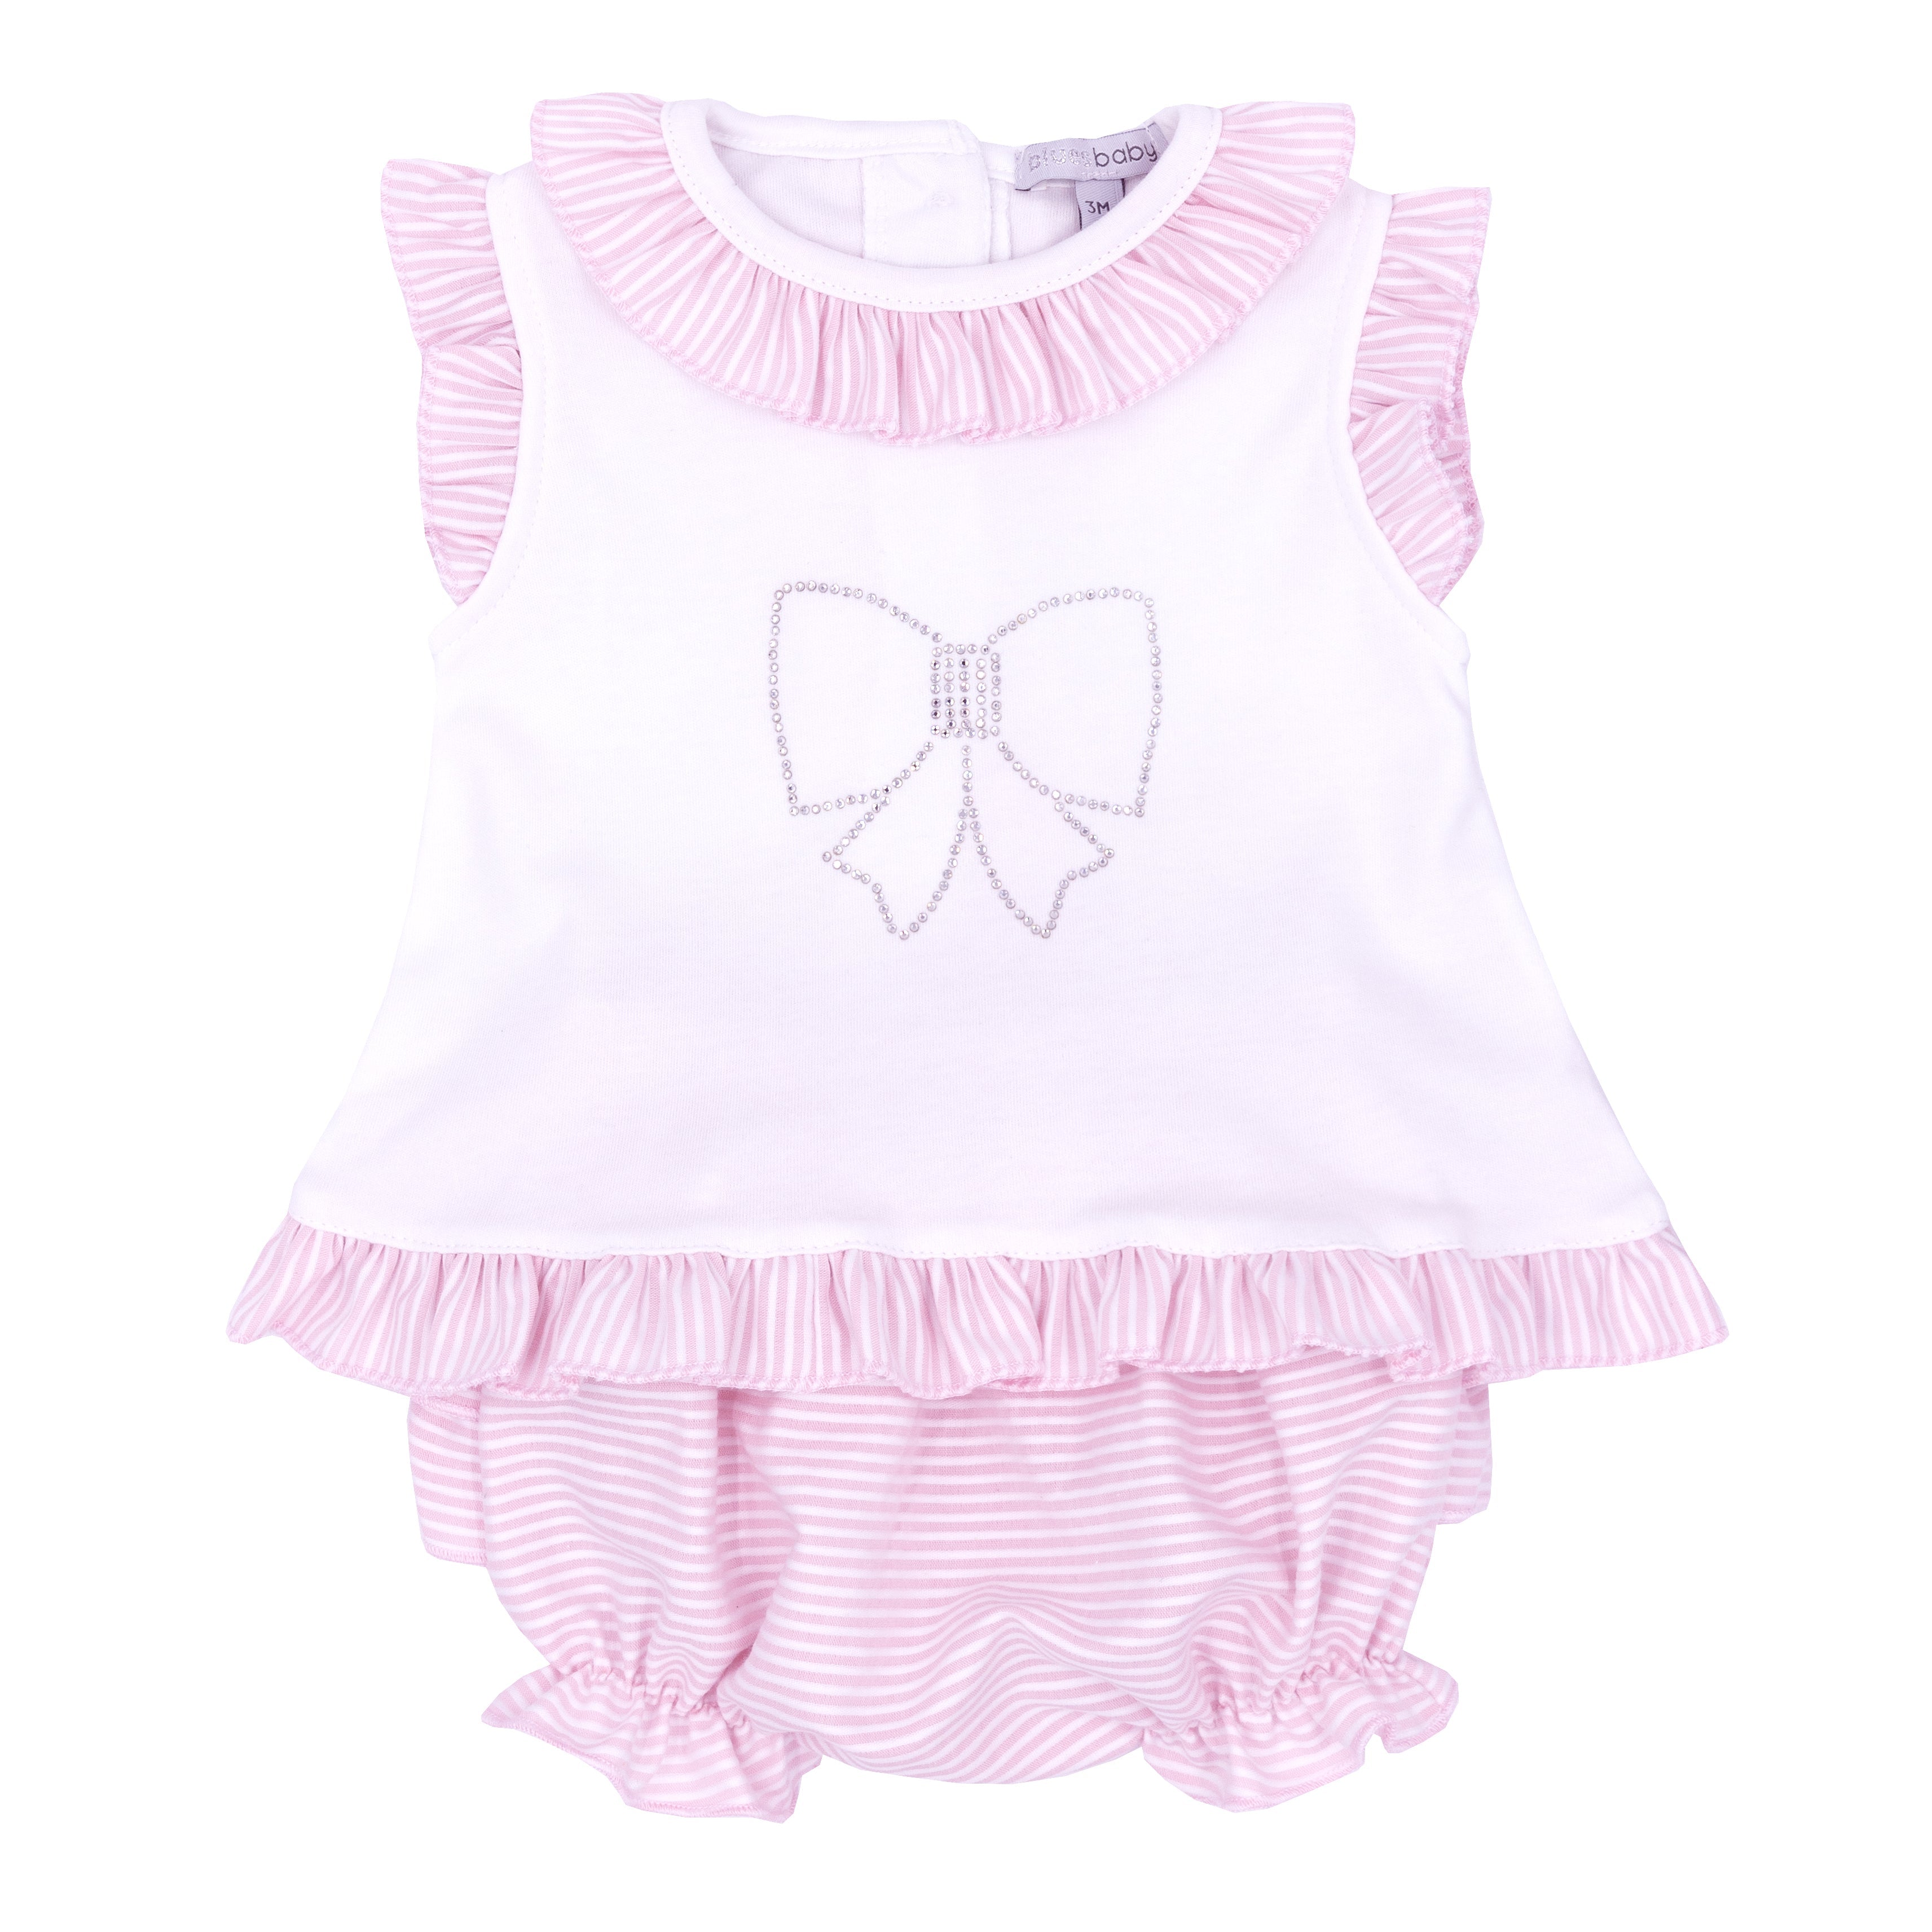 Girls t shirt and bloomer set with diamante applique